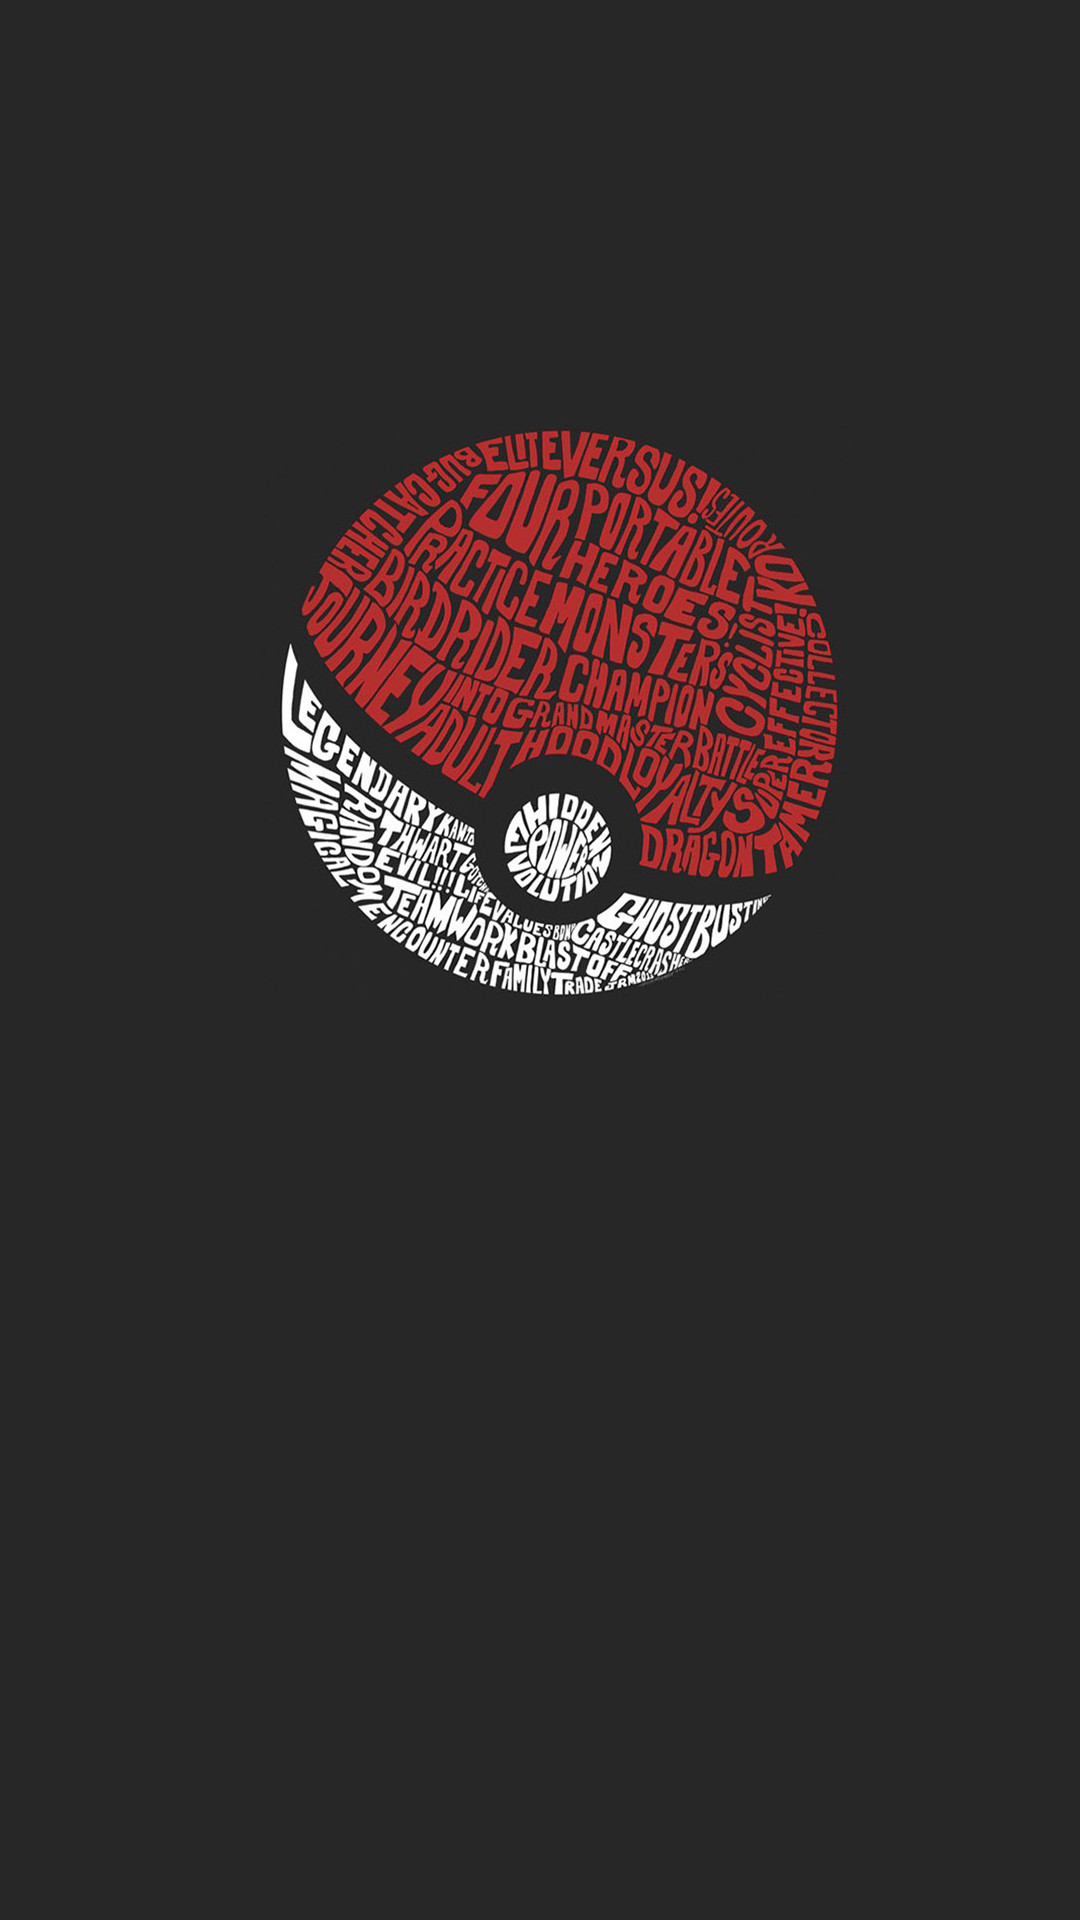 Minimal walls for pokemon fans. Collected and edited by me. Share and enjoy